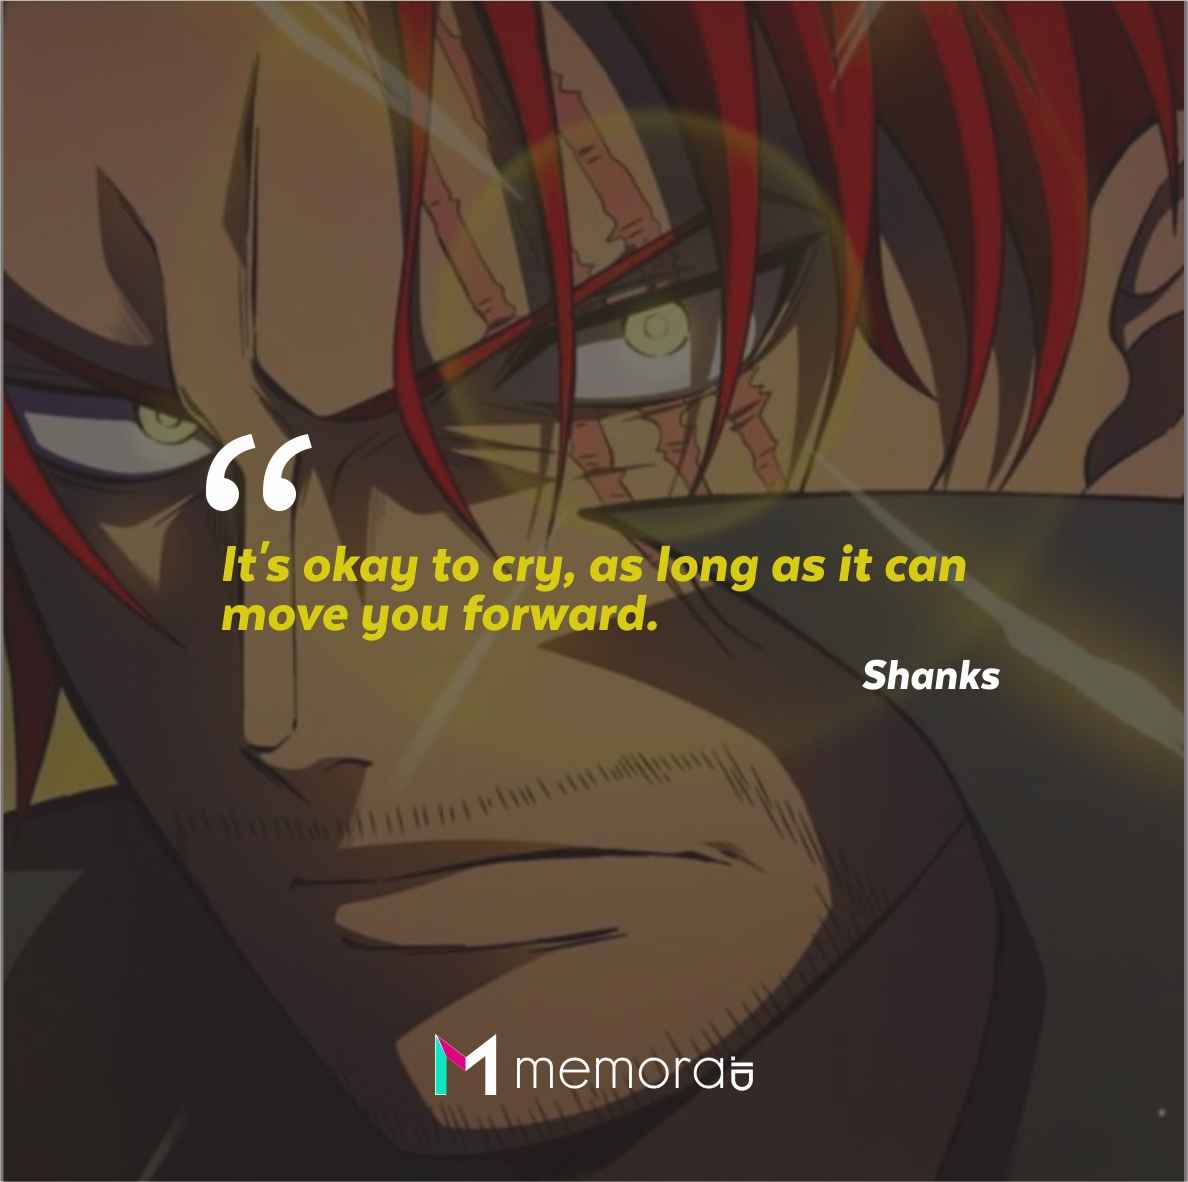 Akagami no Shanks' Top 19 Quotes: Lessons in Courage and Friendship from One Piece